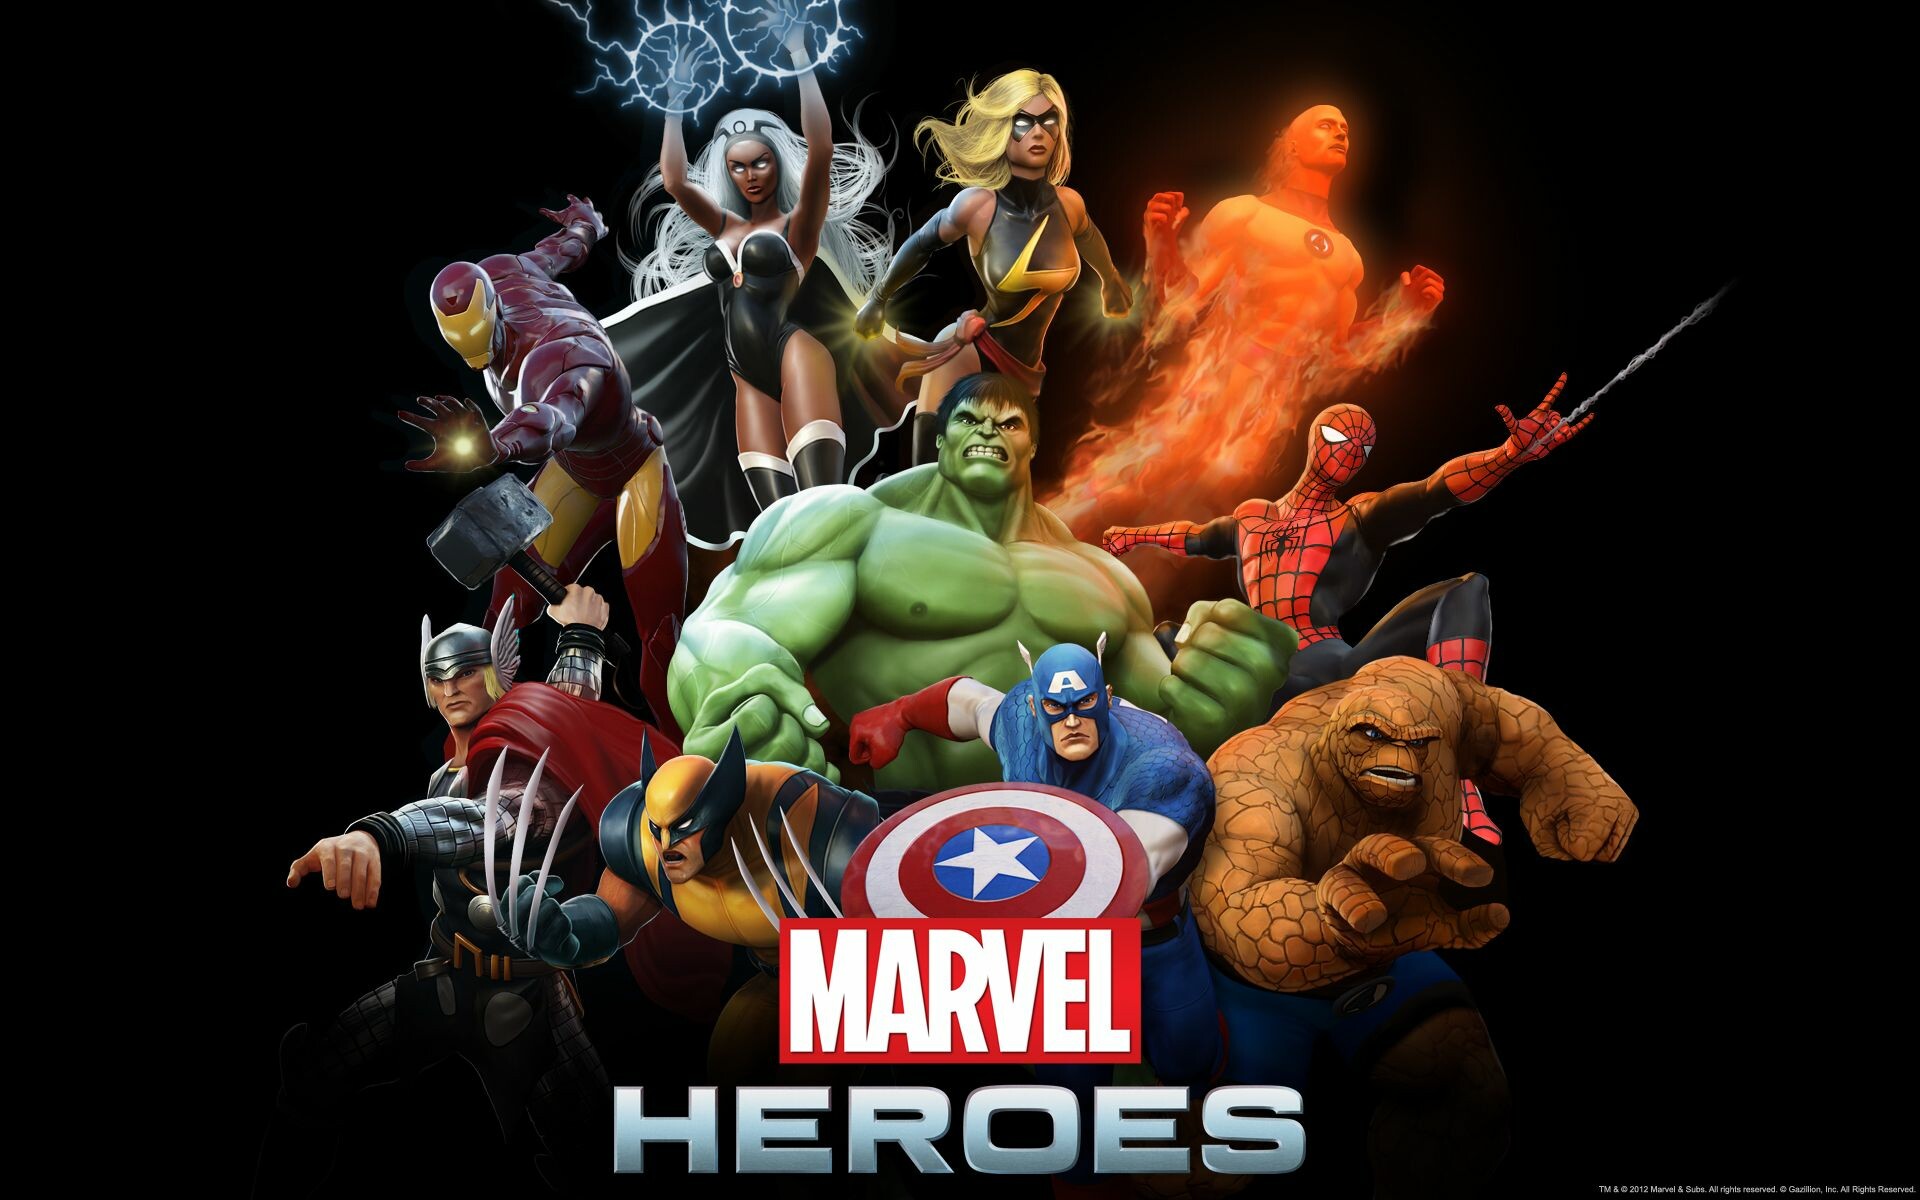 41+ Marvel Heroes Wallpapers: HD, 4K, 5K for PC and Mobile | Download free  images for iPhone, Android